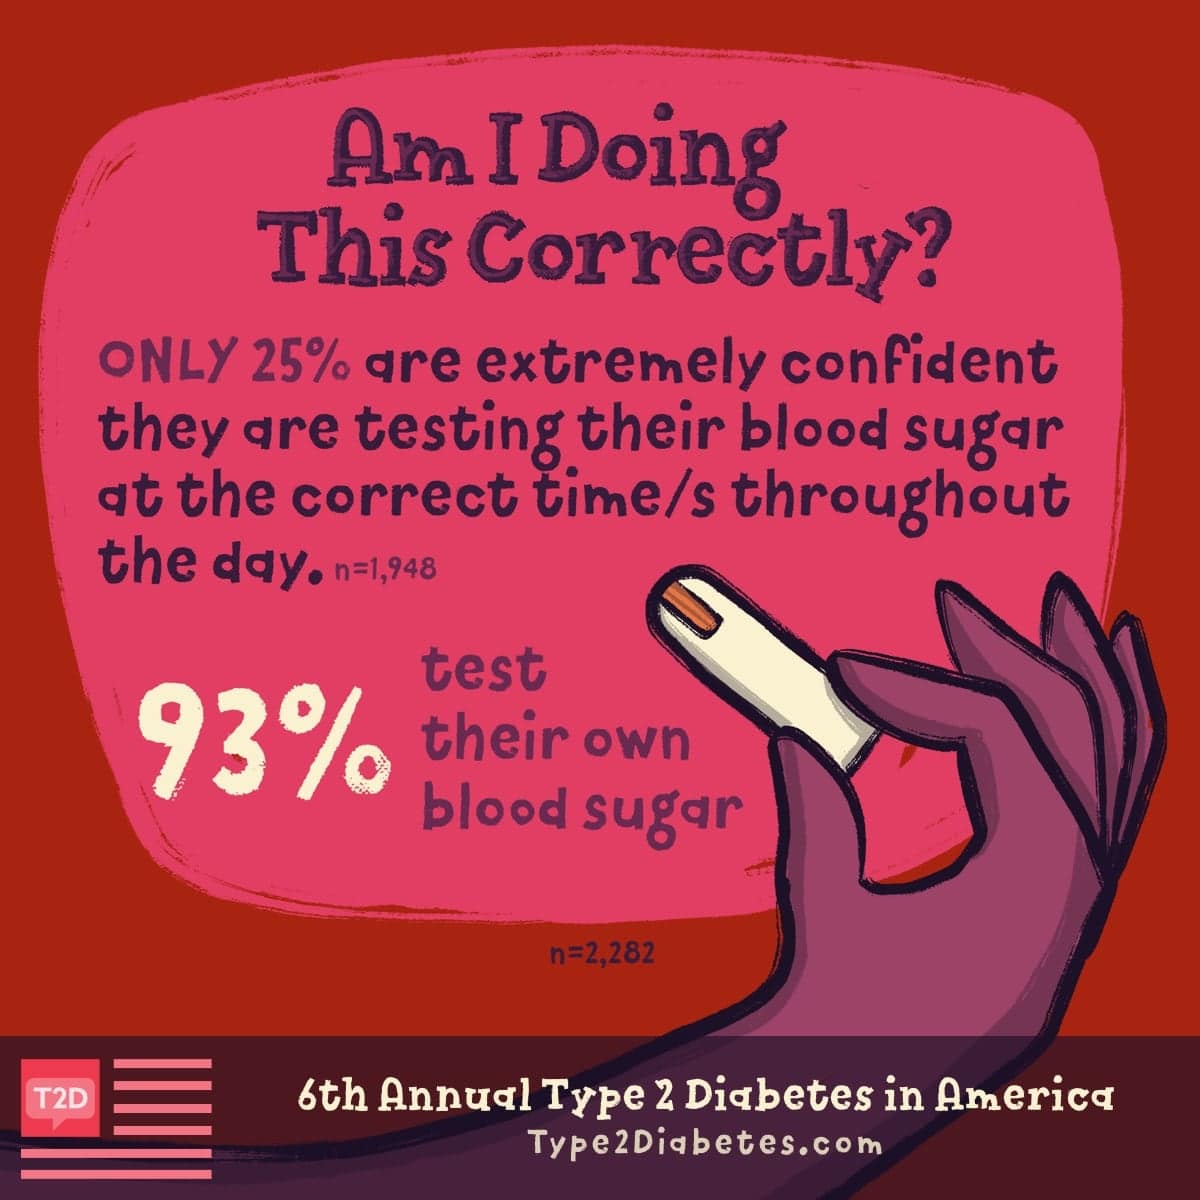 Only 25% of survey respondents are extremely confident they are testing their blood sugar at the correct time/time(s) throughout the day.